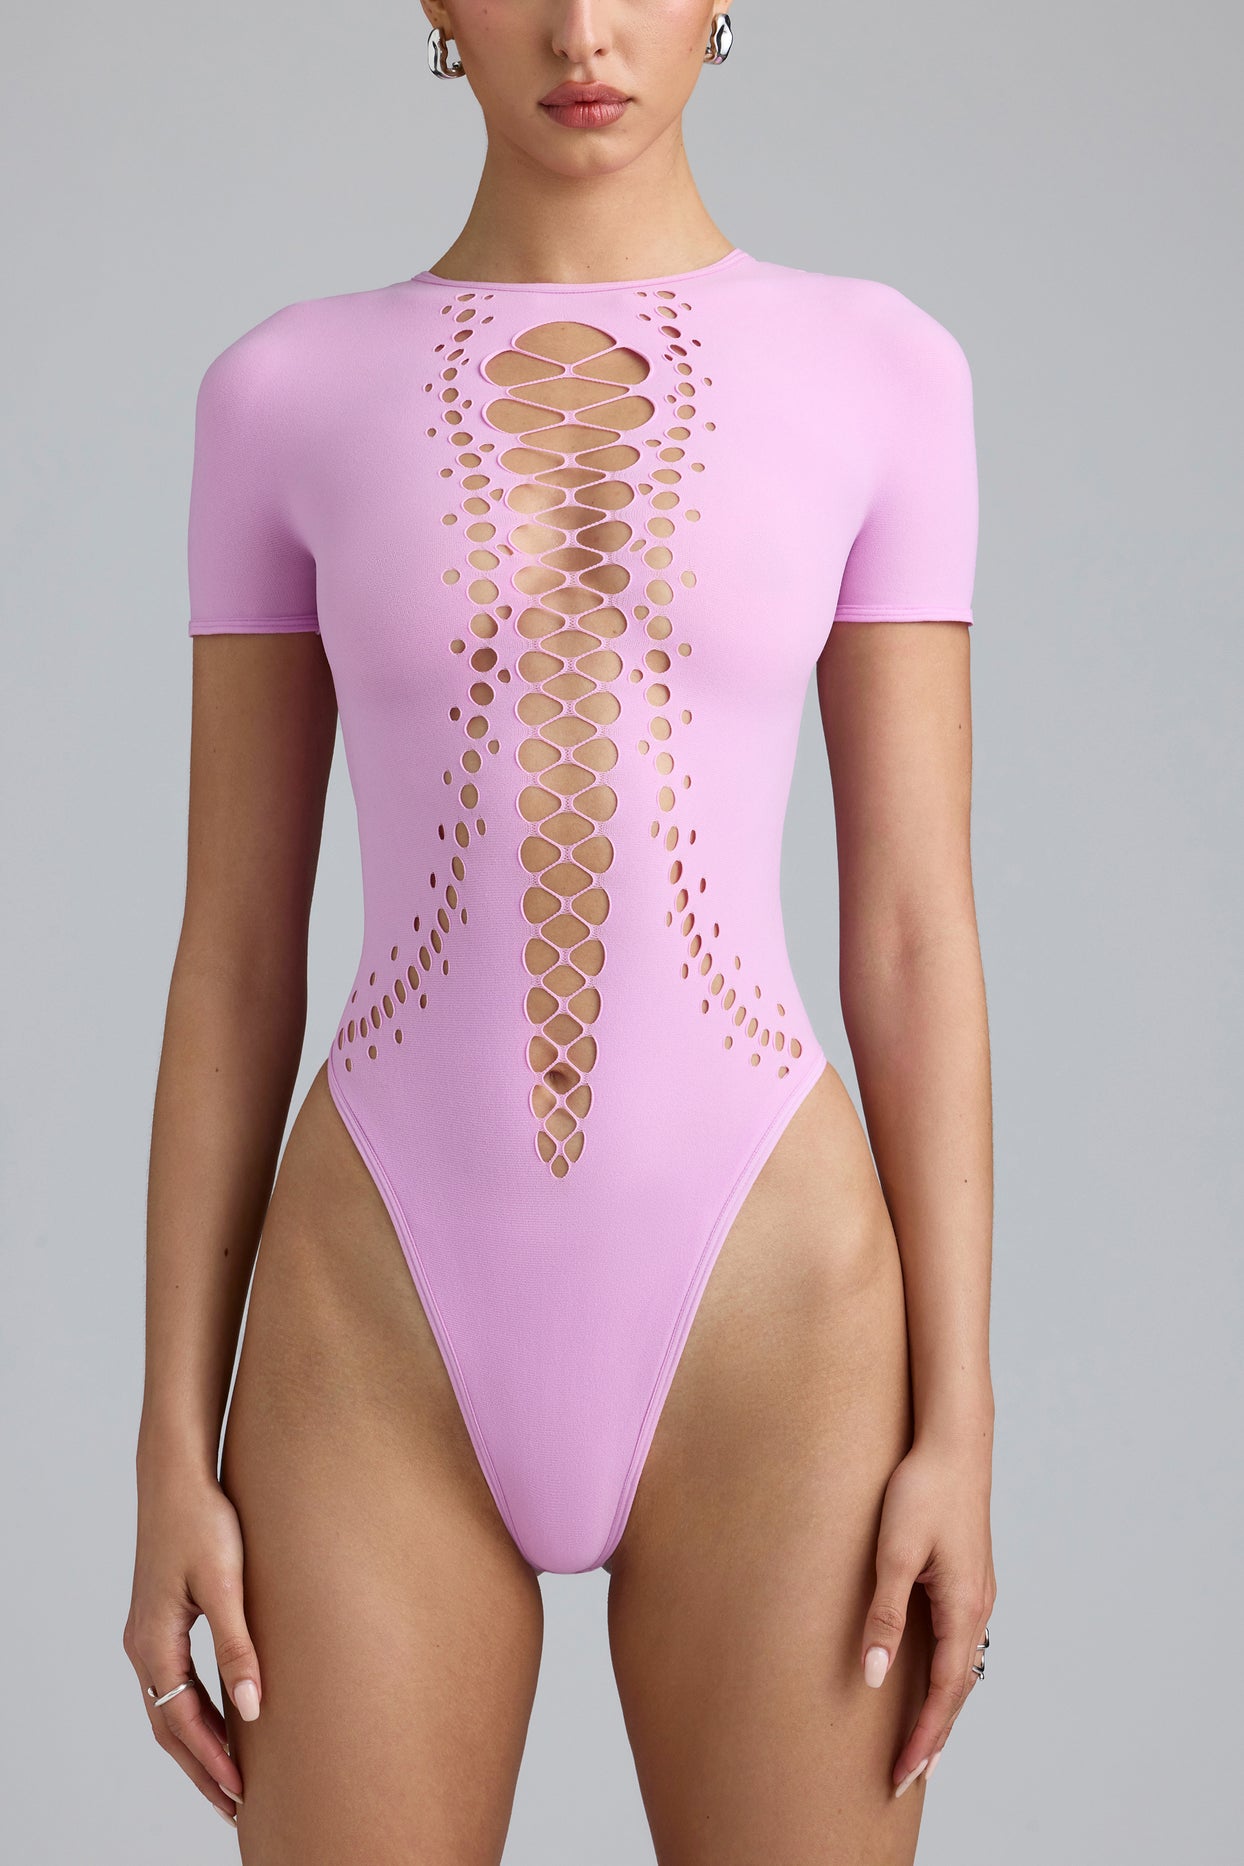 Feminine Lace Bodysuit For Under £10! - Devoted To Pink